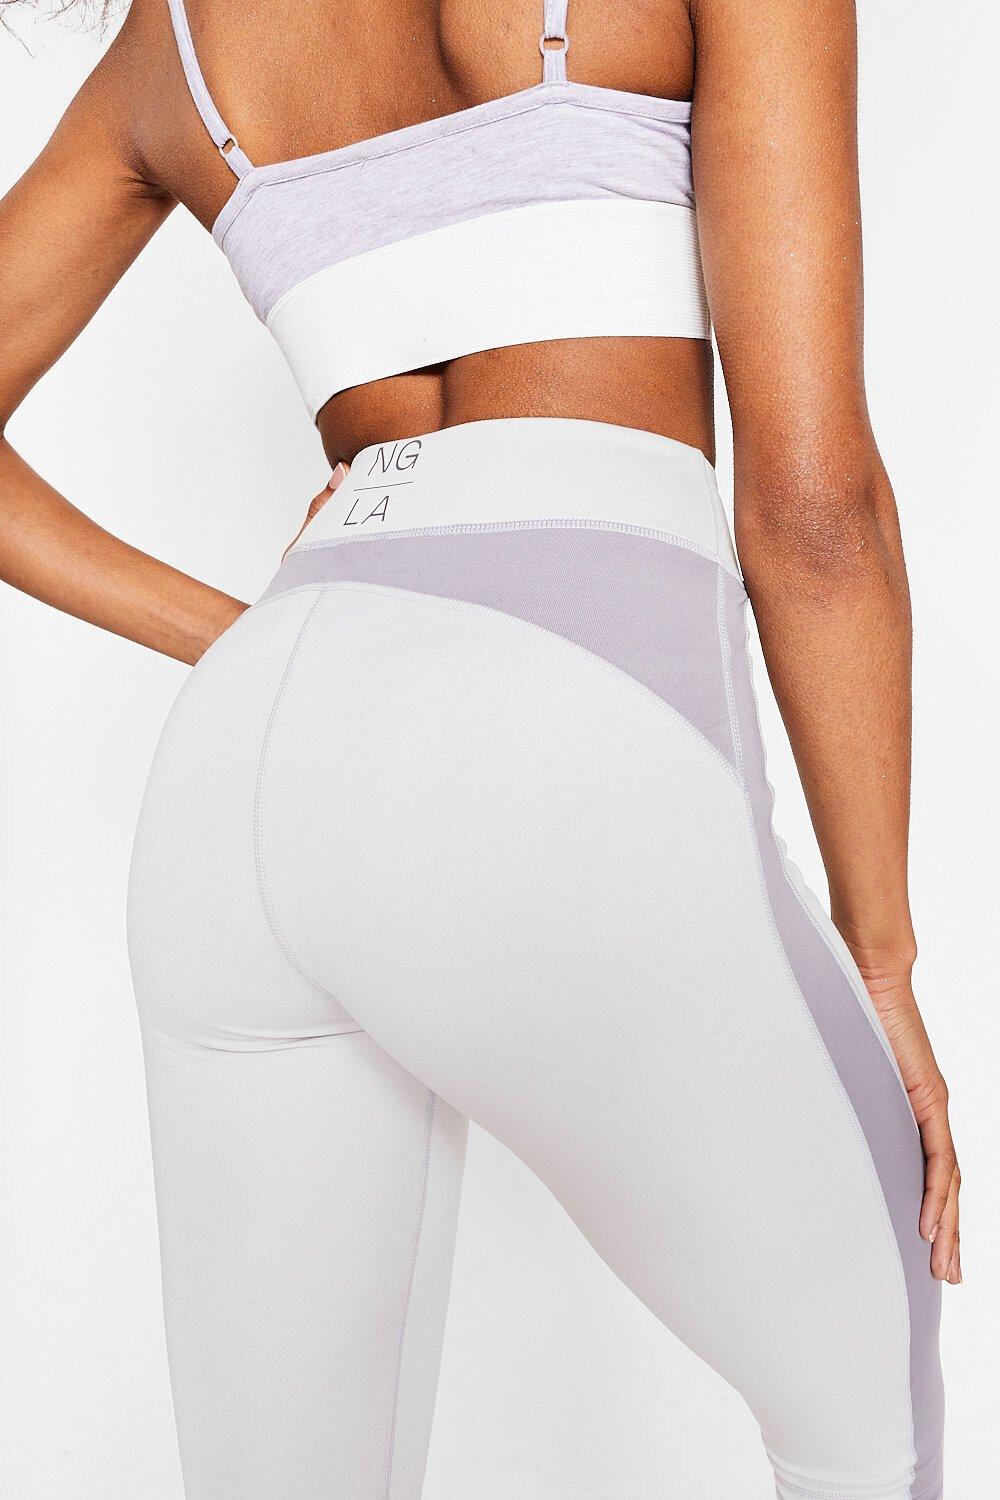 Two Tone High Waisted Workout Leggings